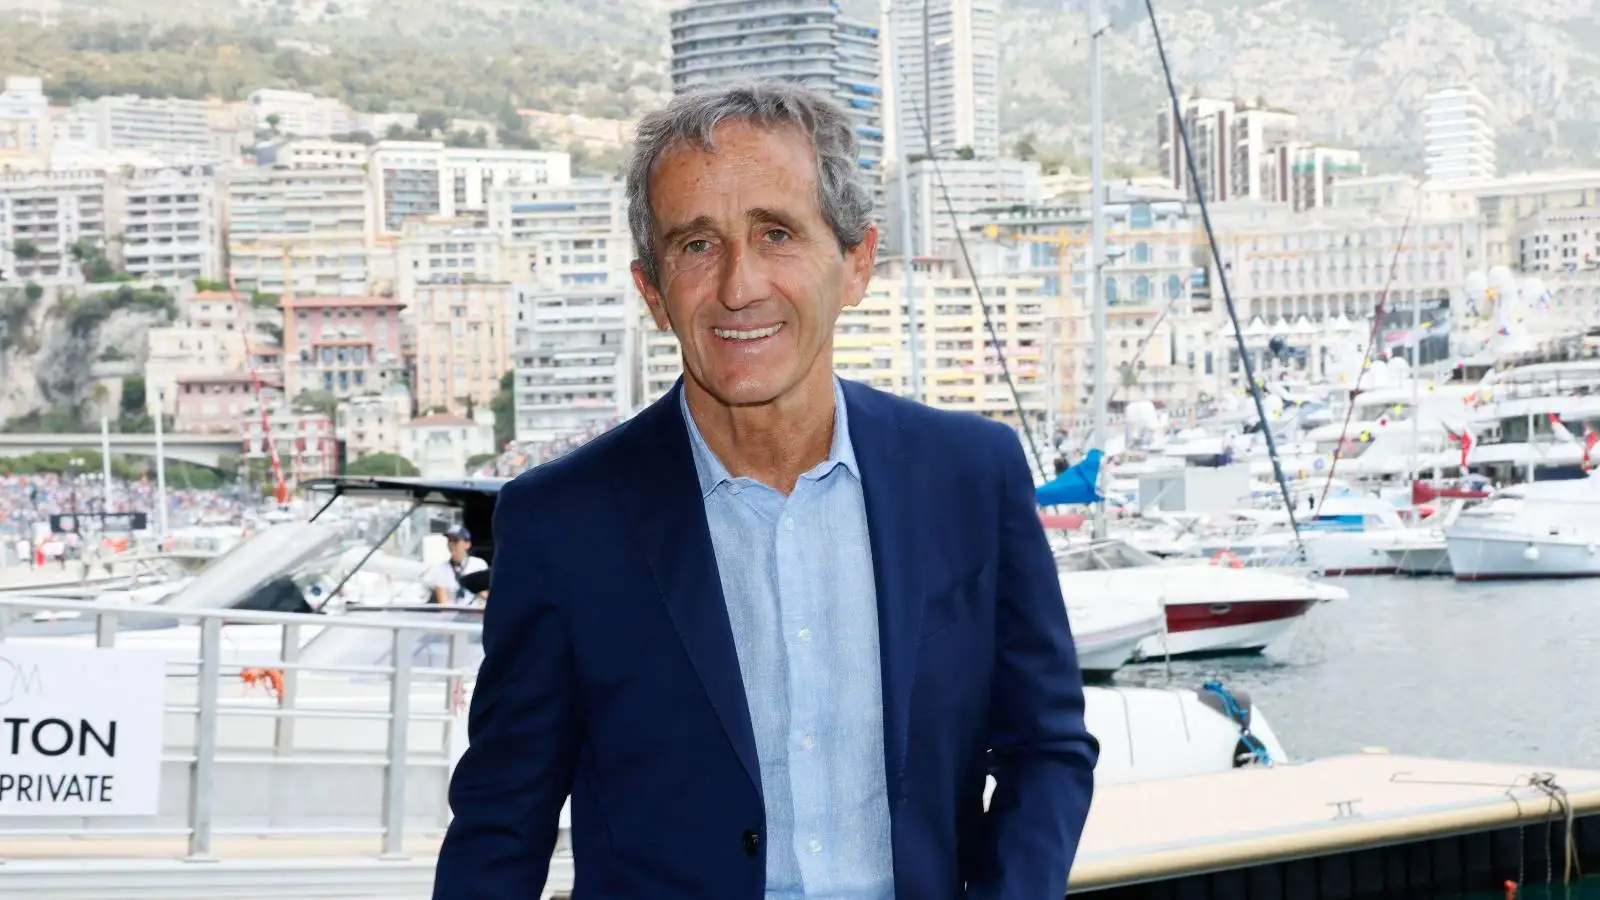 Four-time F1 champ Alain Prost smiling. Monaco, May 2022.